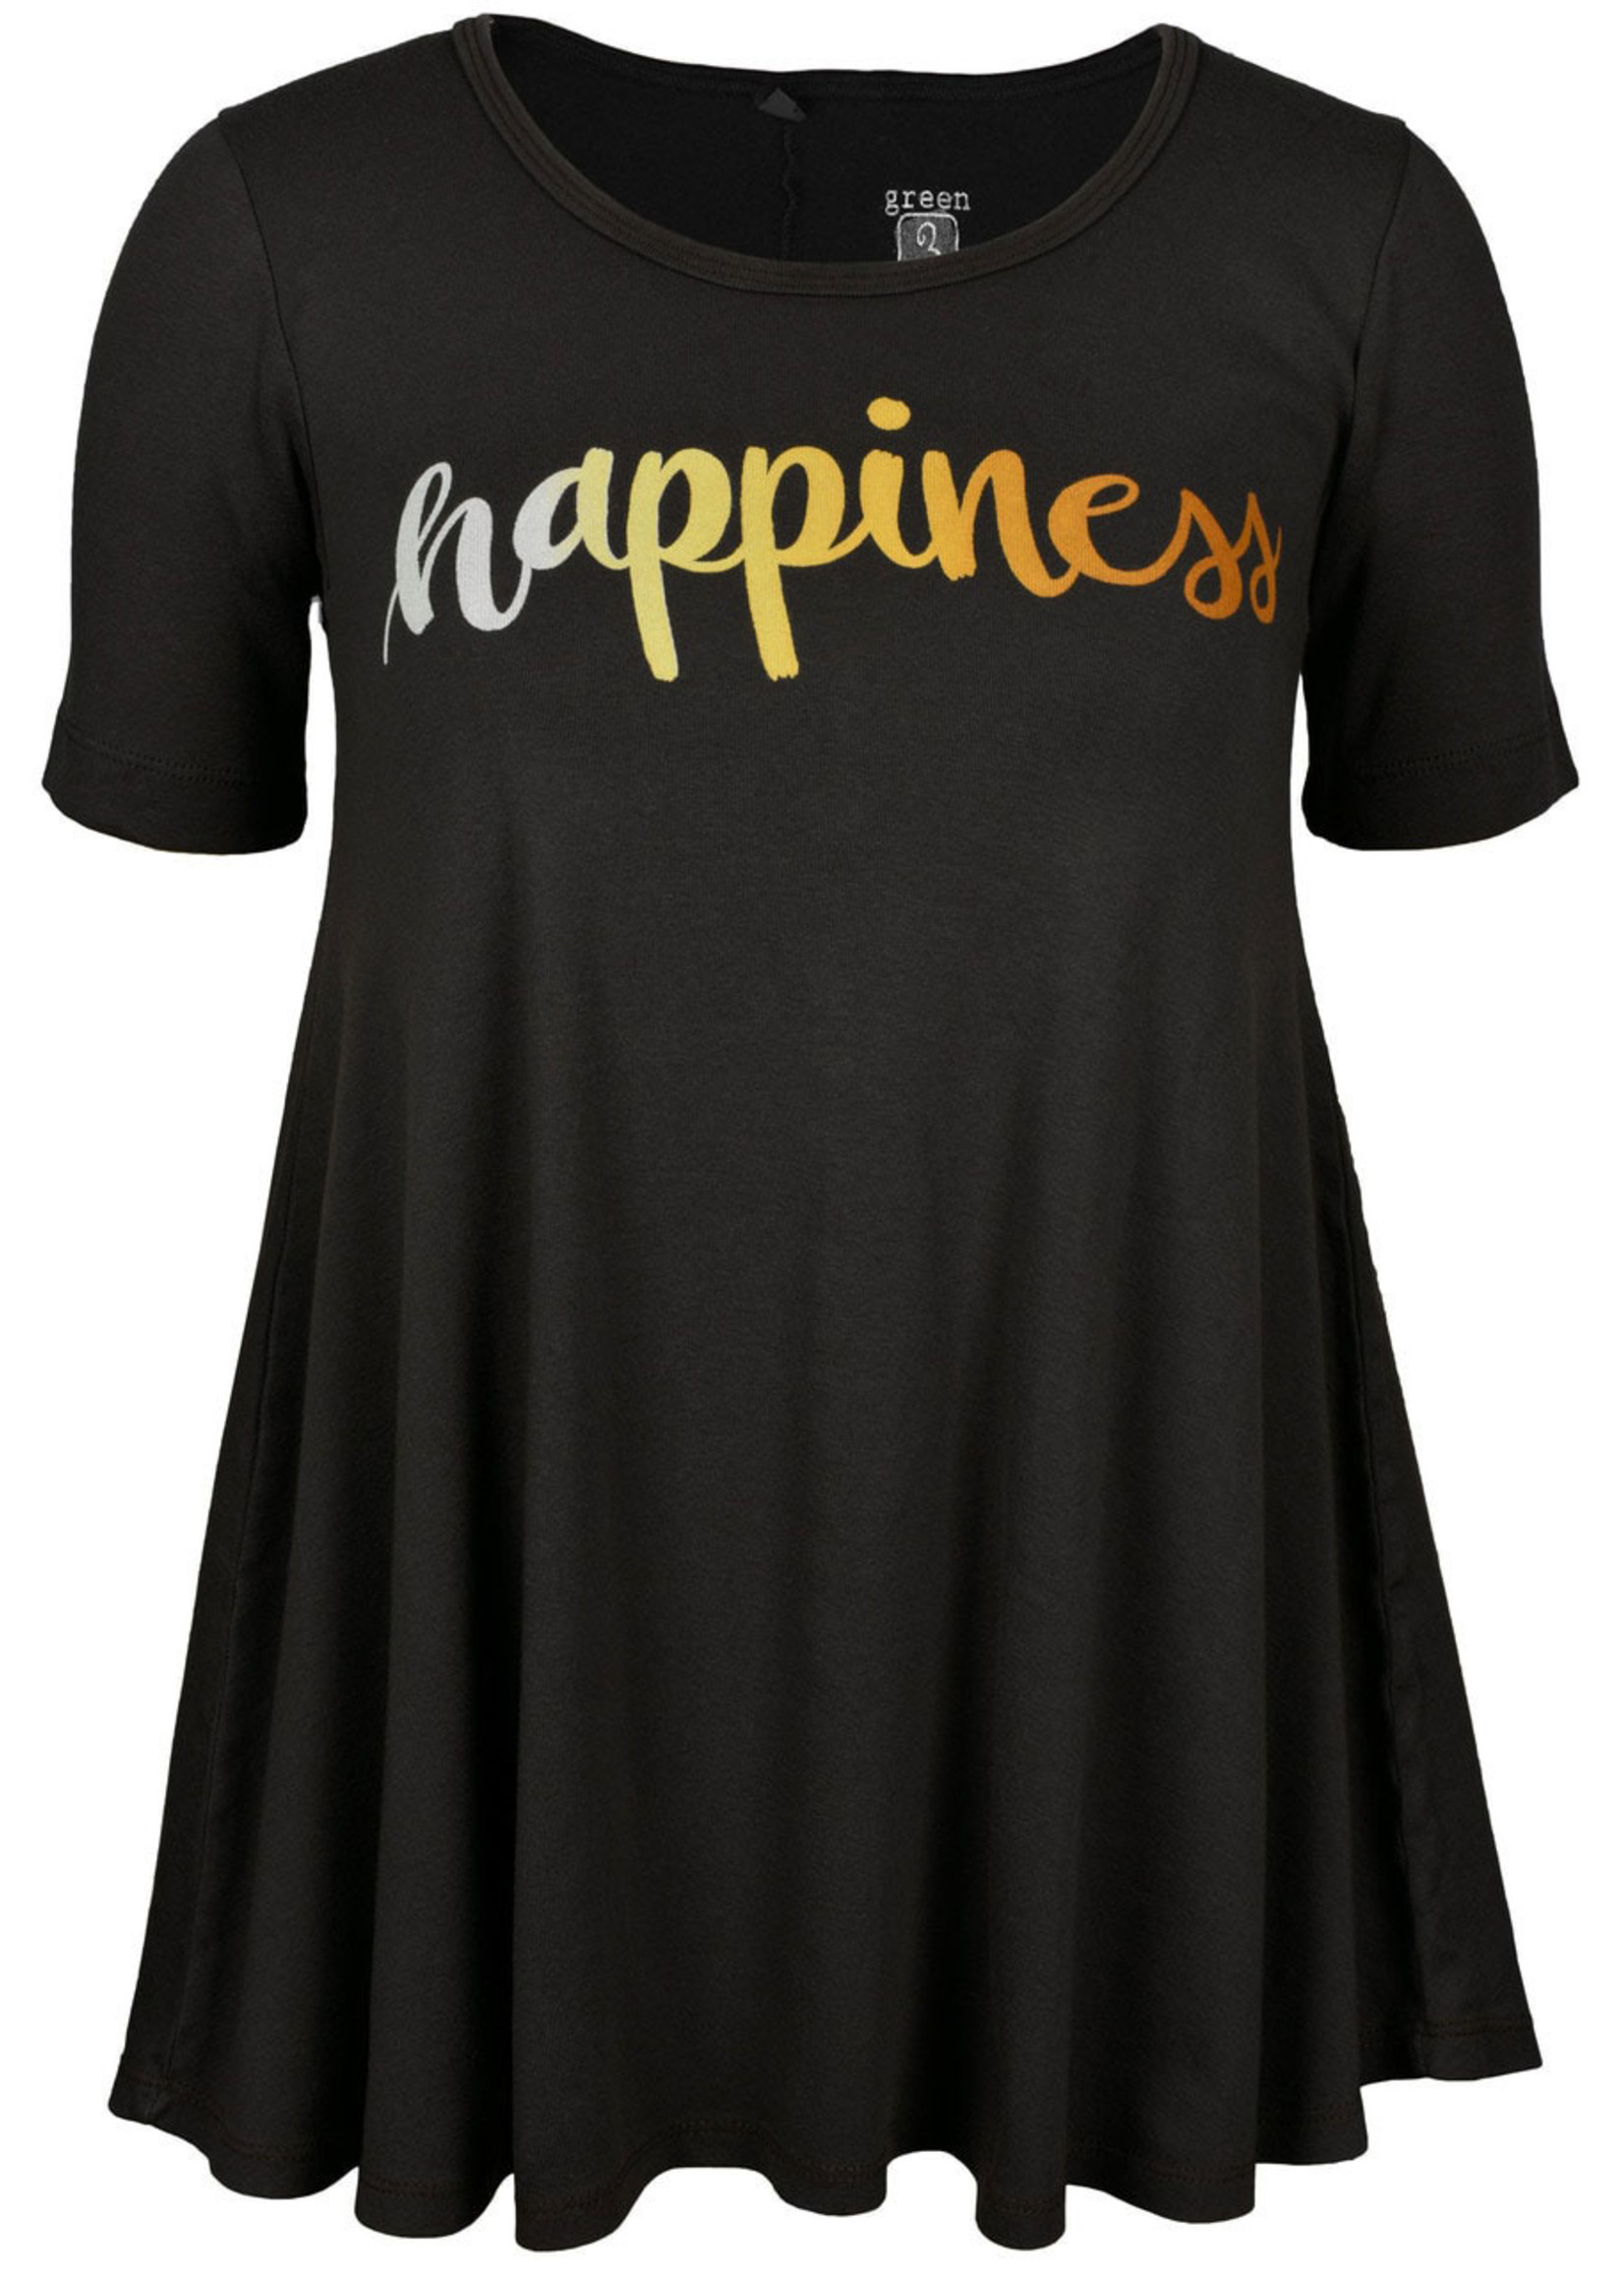 Green 3 Apparel Happiness SS Tunic